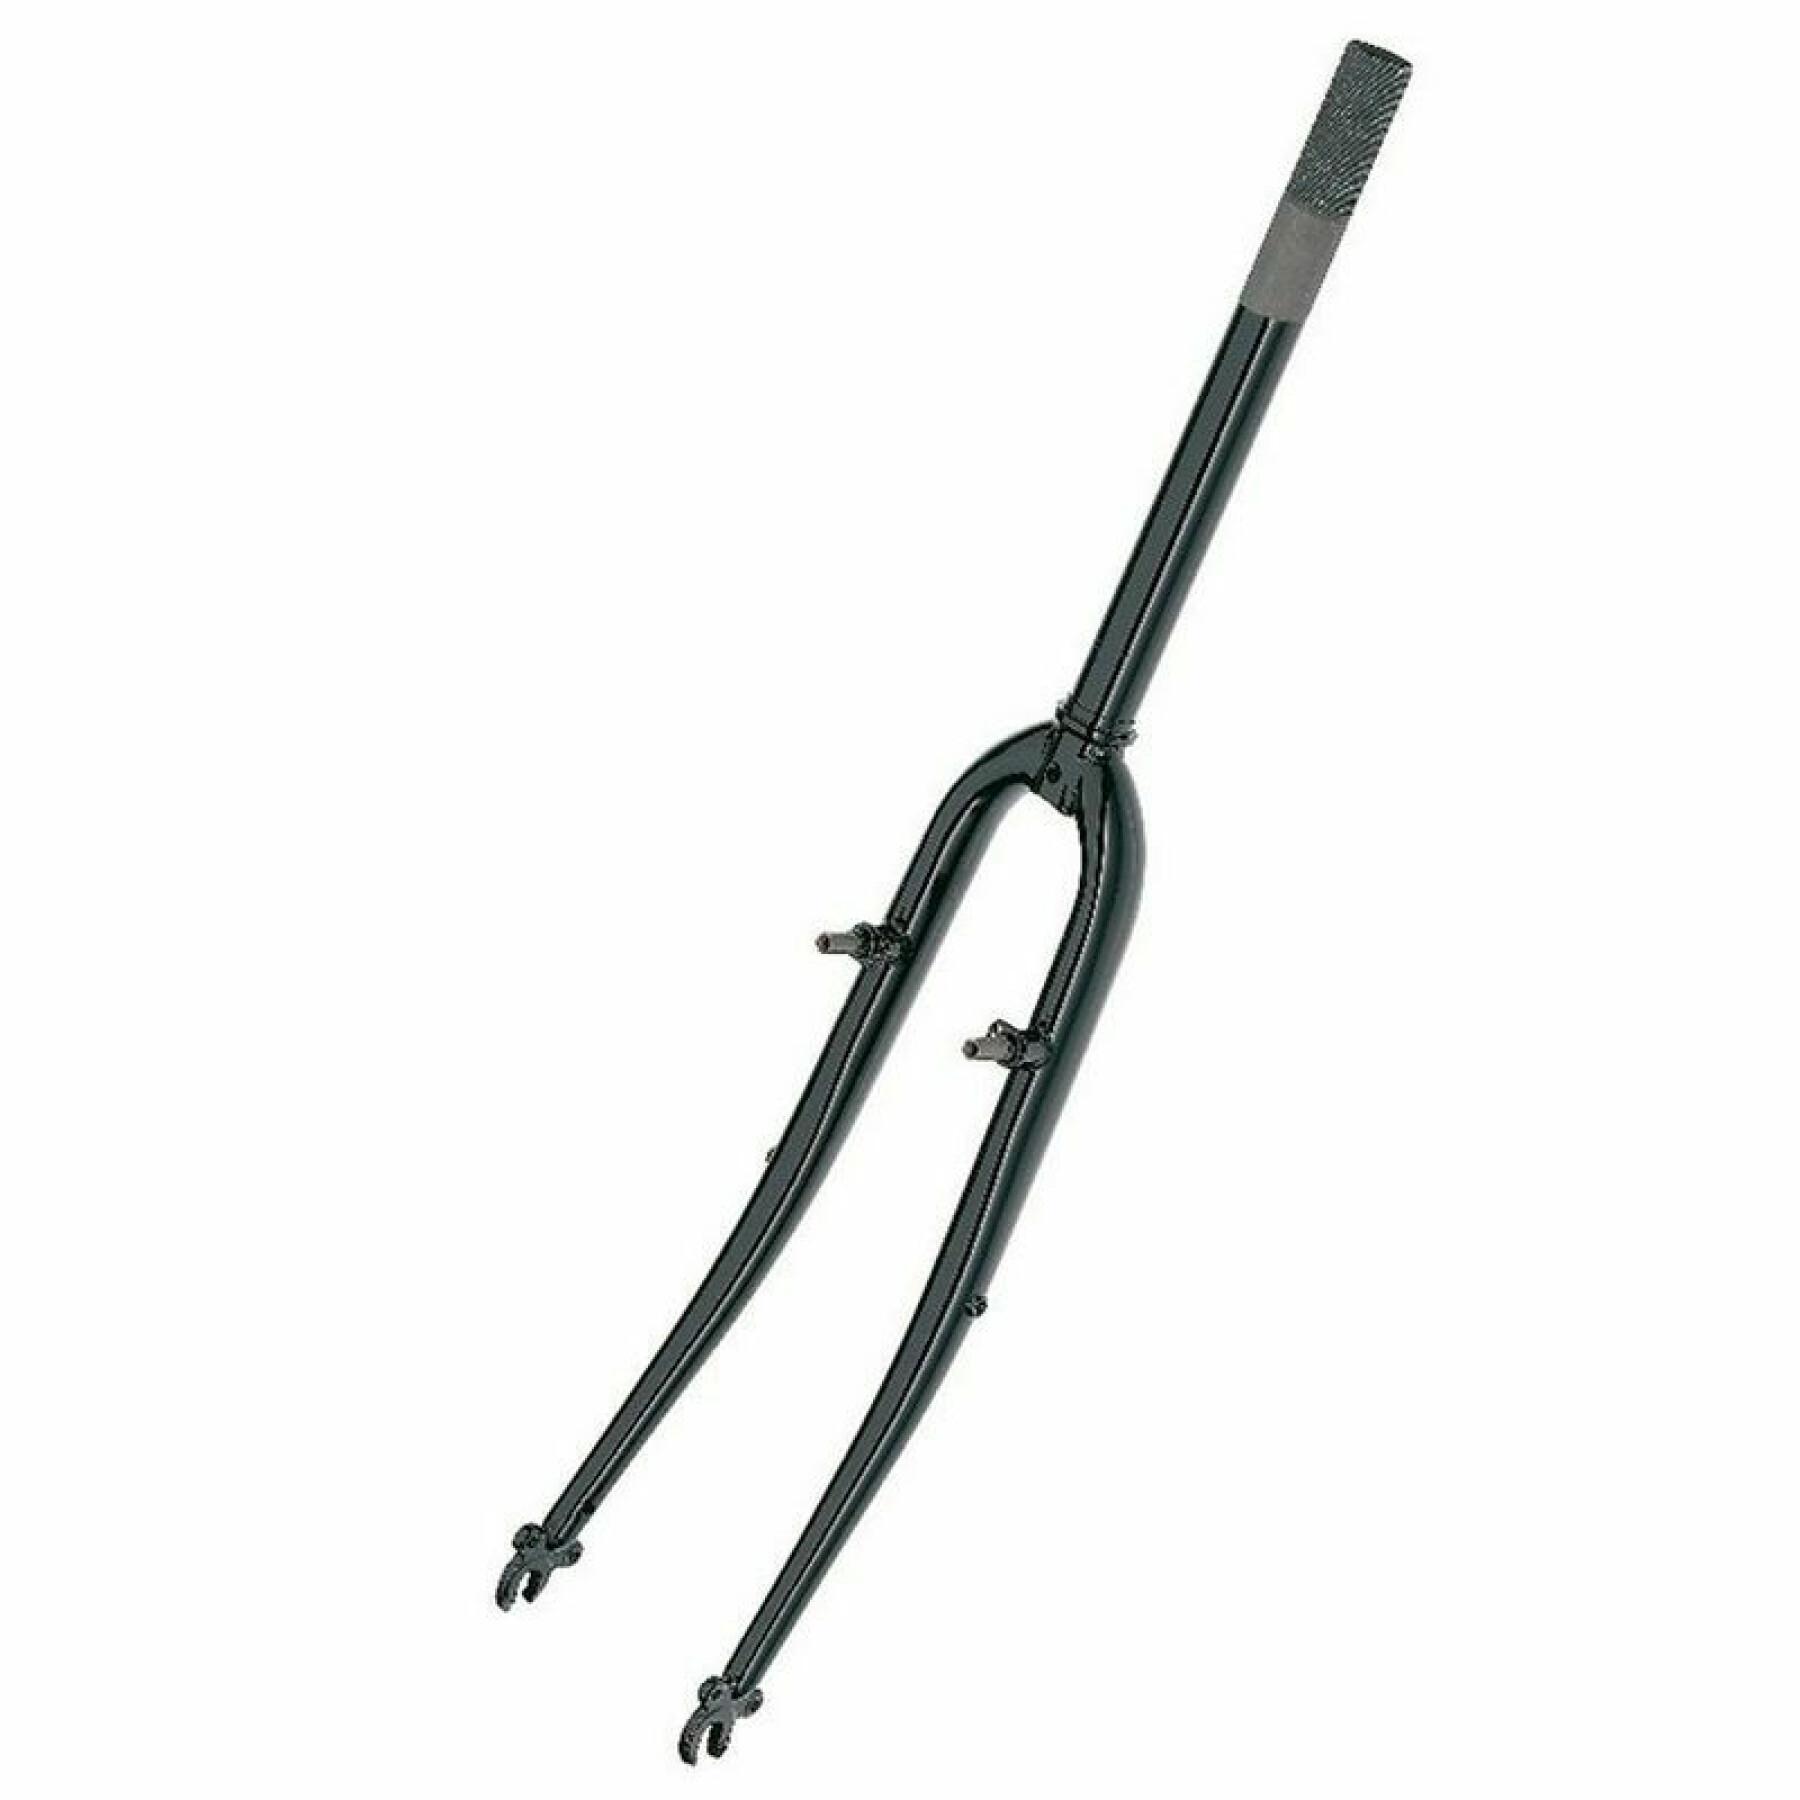 Forcella Point unicrown vtt 28" 1"